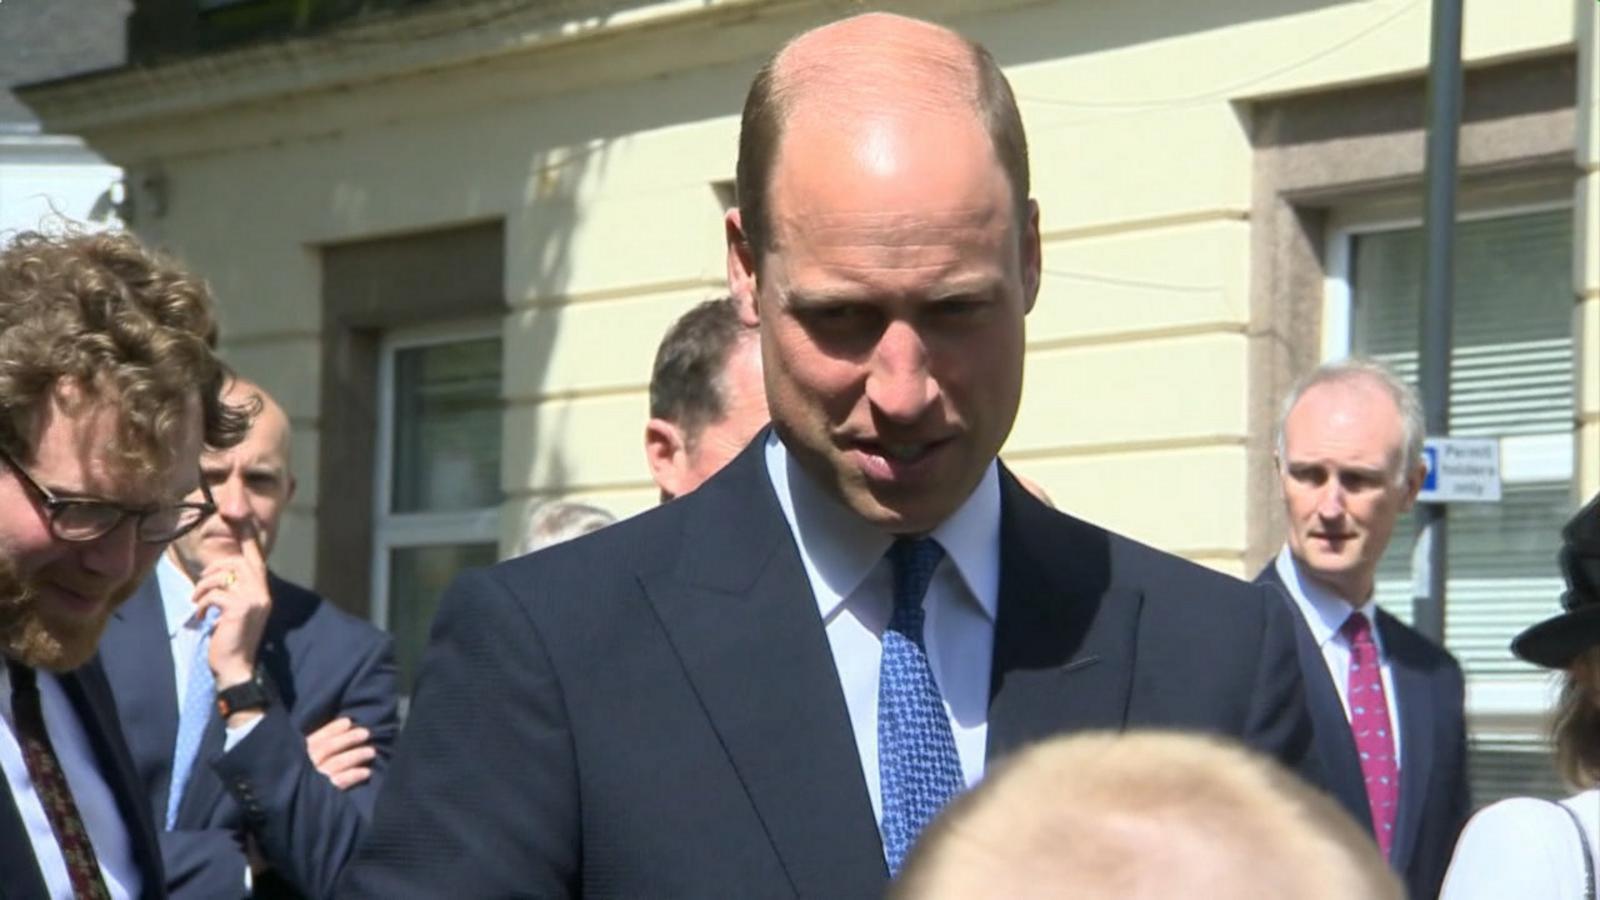 VIDEO: Prince William says Princess Kate is 'doing well'